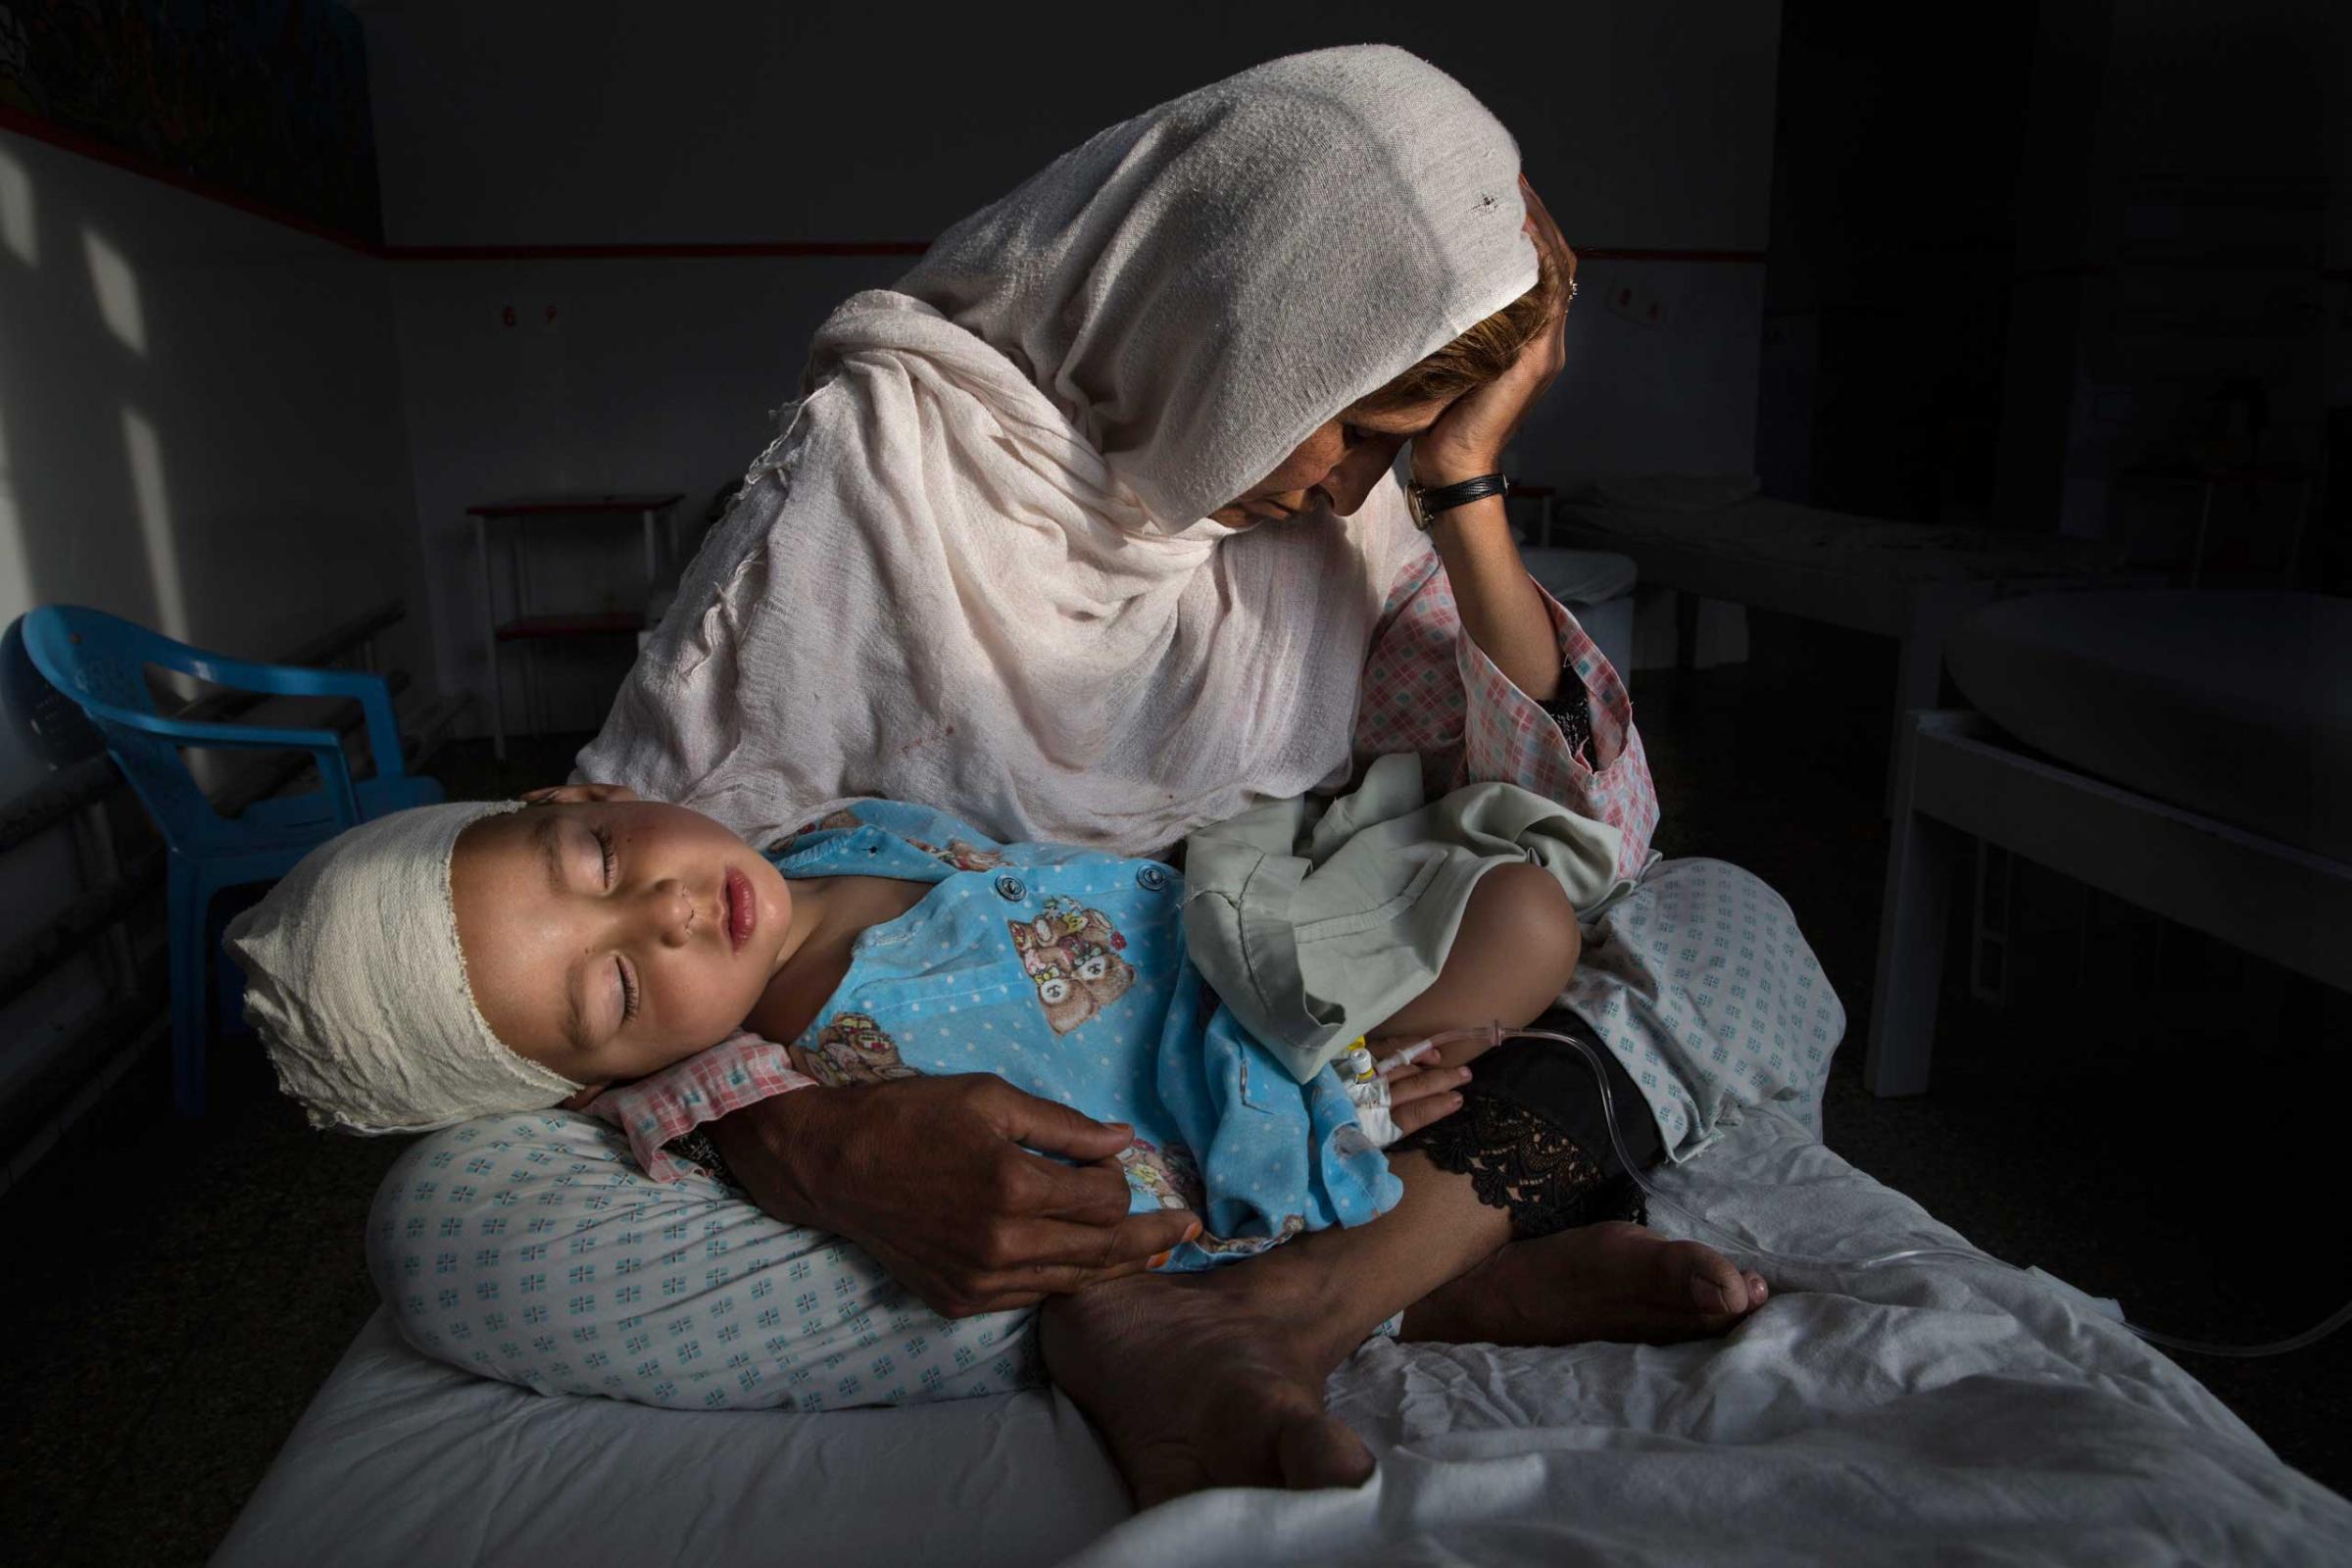 KABUL, AFGHANISTAN -MARCH 29, 2016: A the Emergency hospital Najiba holds her nephew Shabir, age 2, who was injured from a bomb blast which killed his sister in Kabul on March 29, 2016. Najiba had to stay with the children as their mother buried her daughter.In 2016 marked another milestone in its 15-year engagement in Afghanistan. Despite billions of dollars spent by the international community to stabilize the country, Afghanistan has seen little improvement in terms of overall stability and human security. The situation on the ground for Afghans continues to be grave. Security for the Afghan people has also deteriorated in large swaths of the country, further complicating humanitarian response. Afghan civilians are at greater risk today than at any time since Taliban rule. According to UN statistics, in the first half of 2016 at least 1,600 people had died, and more than 3,500 people were injured, a 4 per cent increase in overall civilian causalities compared to the same period last year. The upsurge in violence has had devastating consequences for civilians, with suicide bombings and targeted attacks by the Taliban and other insurgents causing 70 percent of all civilian casualties.